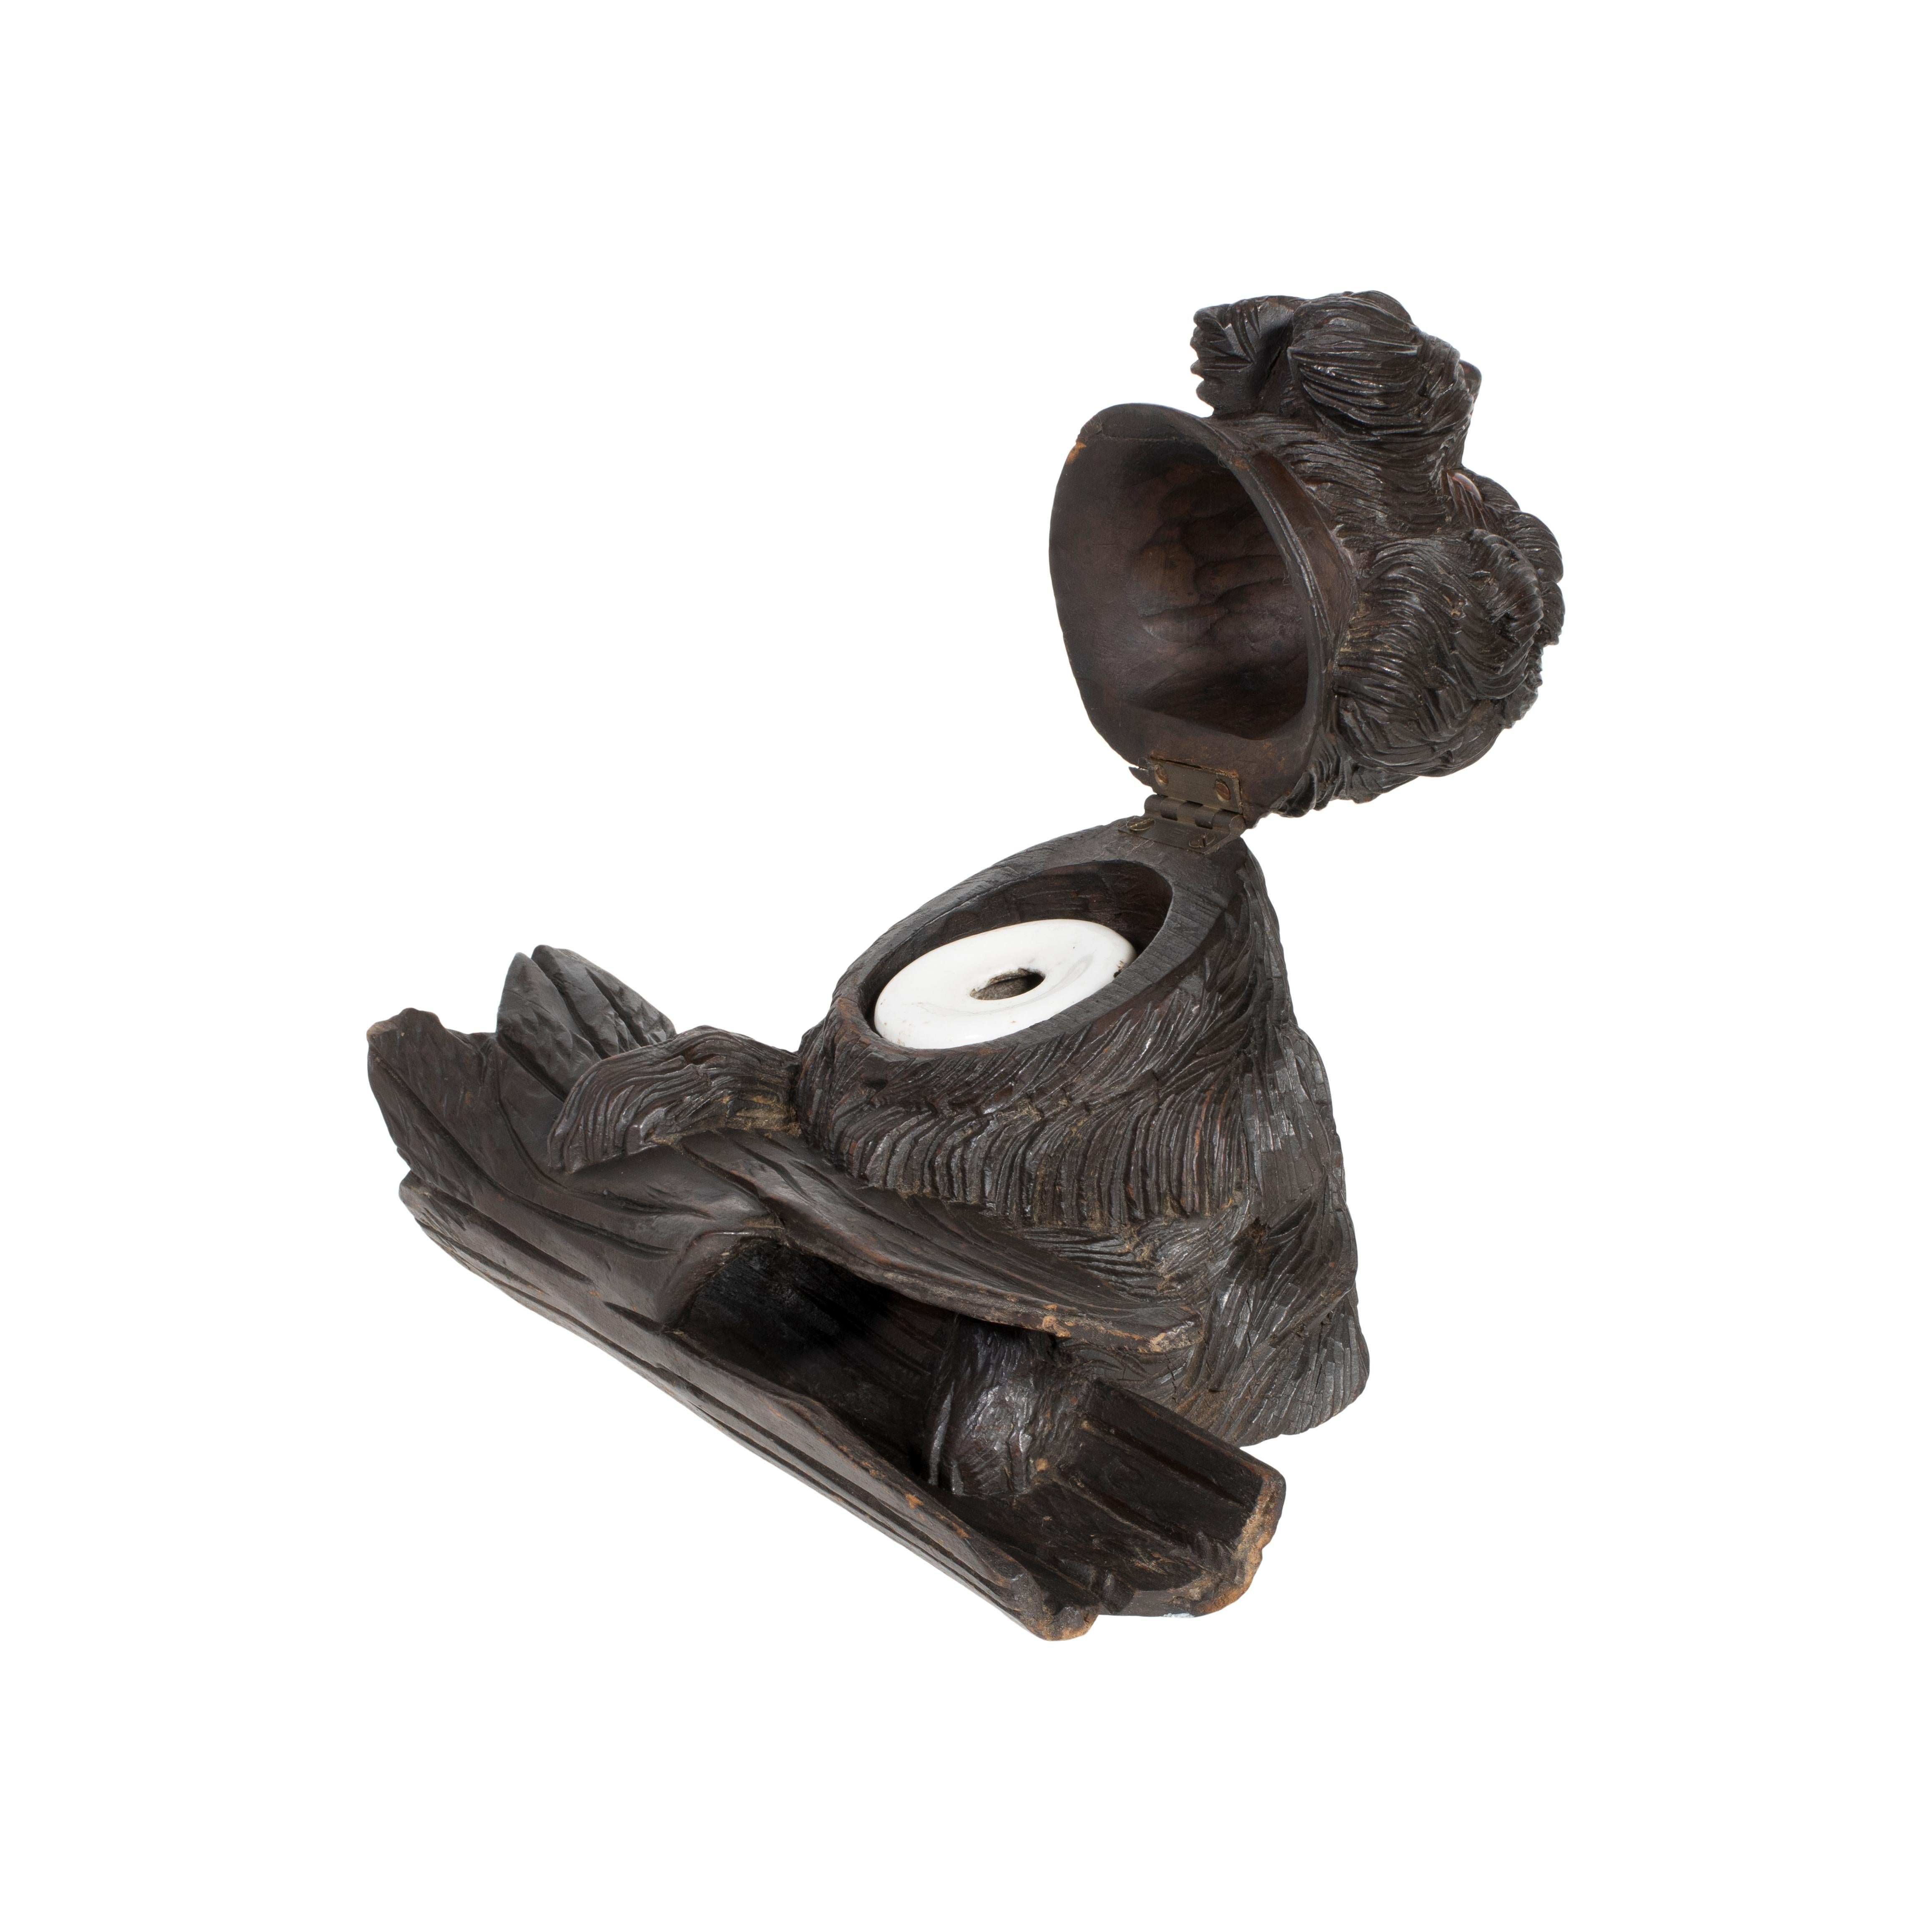 Swiss carved black Forest shaggy dog inkwell with pen holder. In the 1800’s the wood carving industry of Switzerland started in the town of Brienz. By the end of the 1800’s it had become the driving force for this industry. Swiss wood carvers became